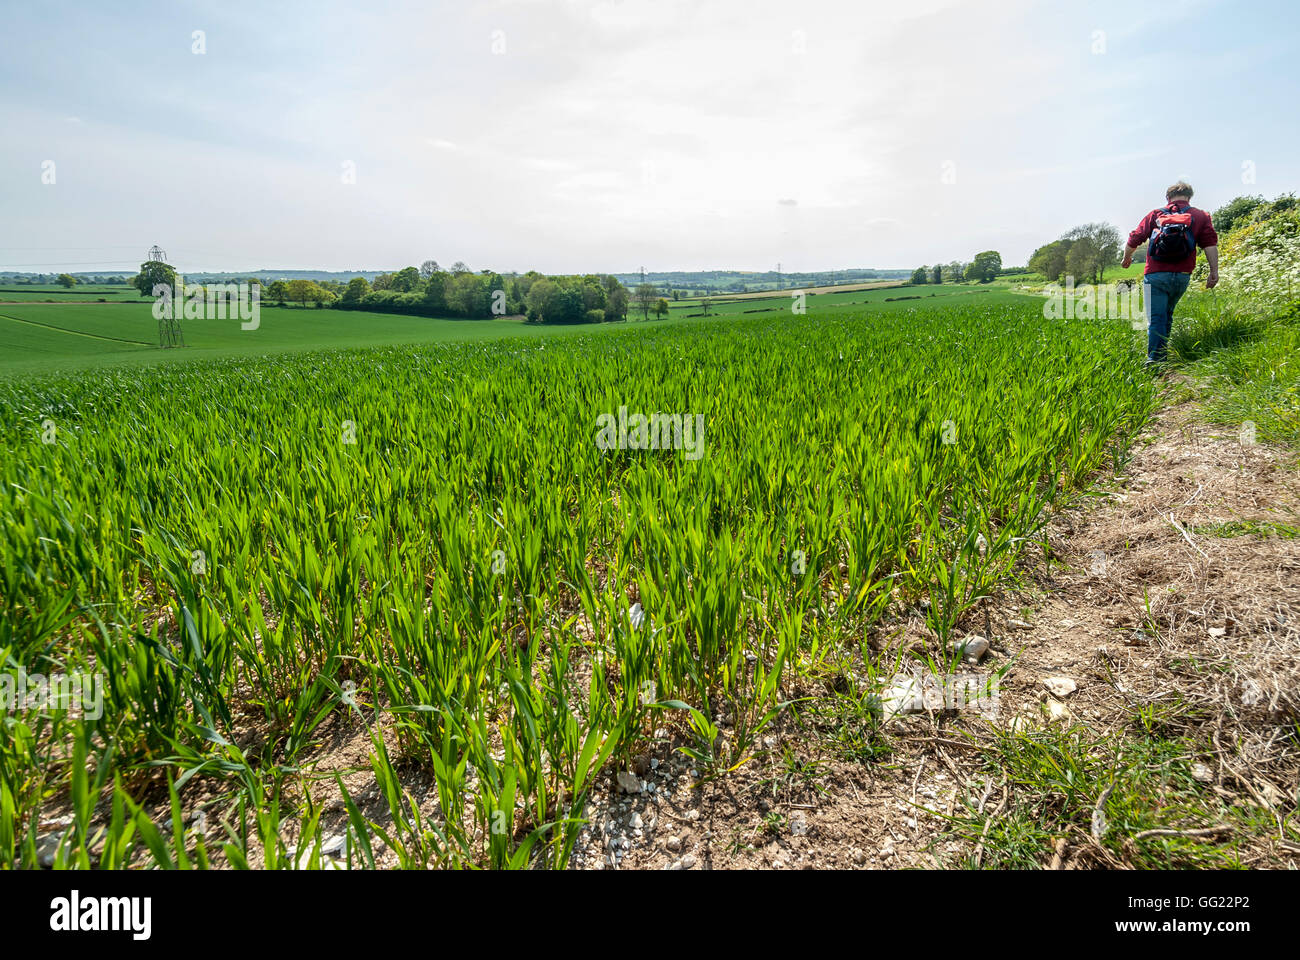 A field in Hampshire, the site of the Battle of Cheriton in the English Civil War, March 29th 1644. Stock Photo